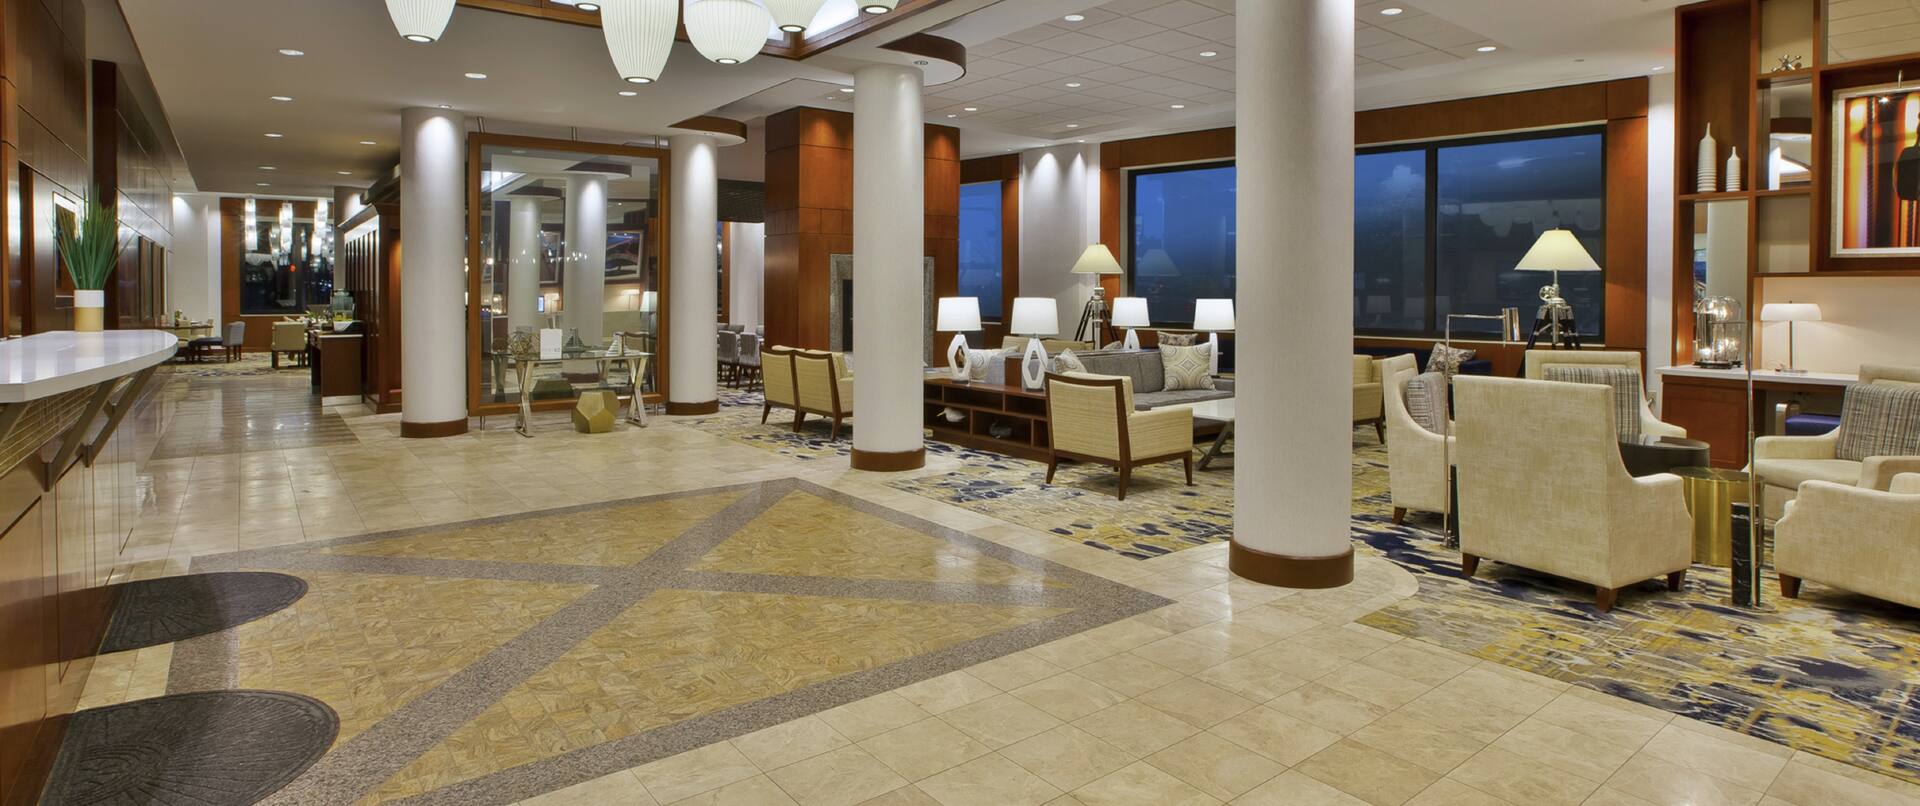 Lobby with seating area